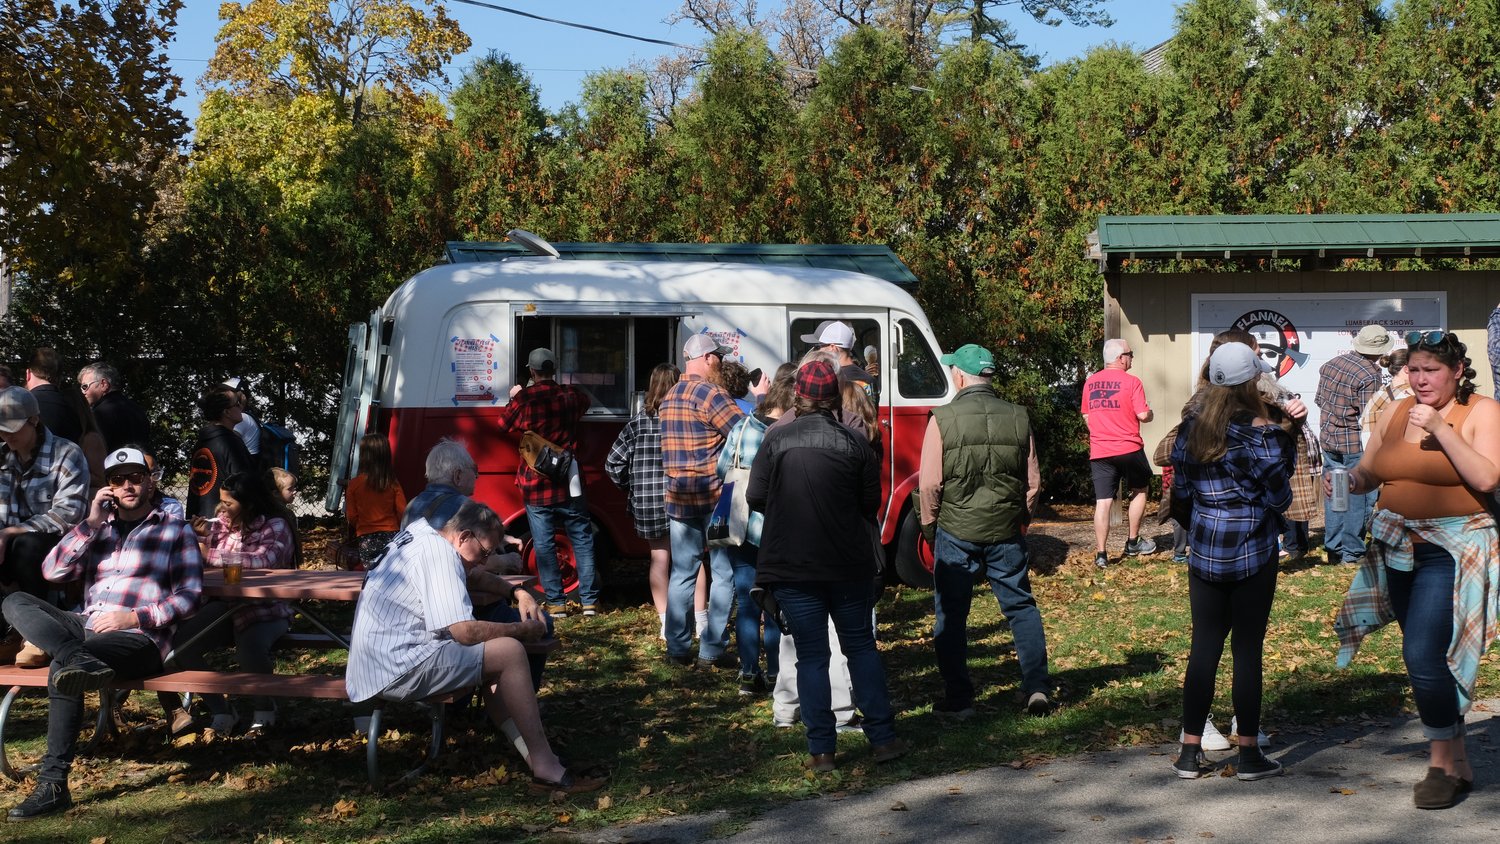 Customers lined up at the Julie Ann's Custard truck.